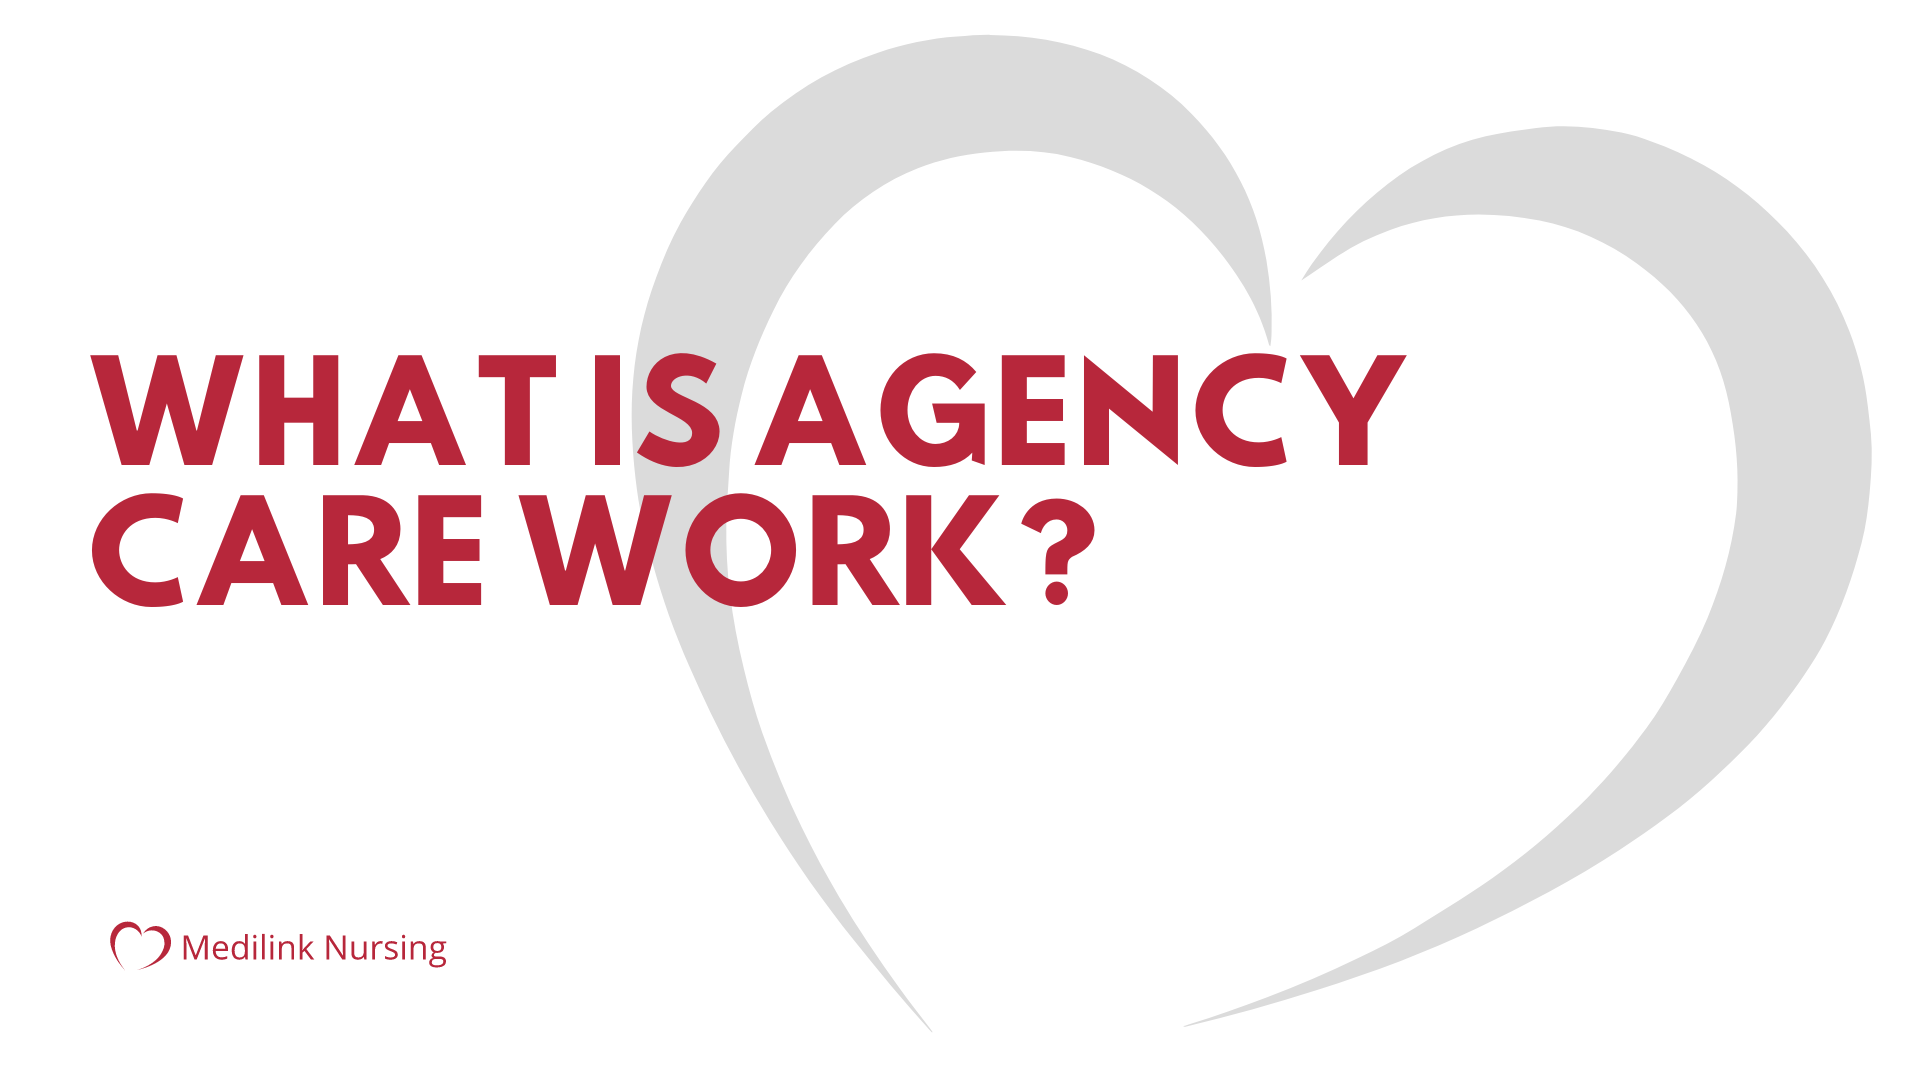 Agency care work